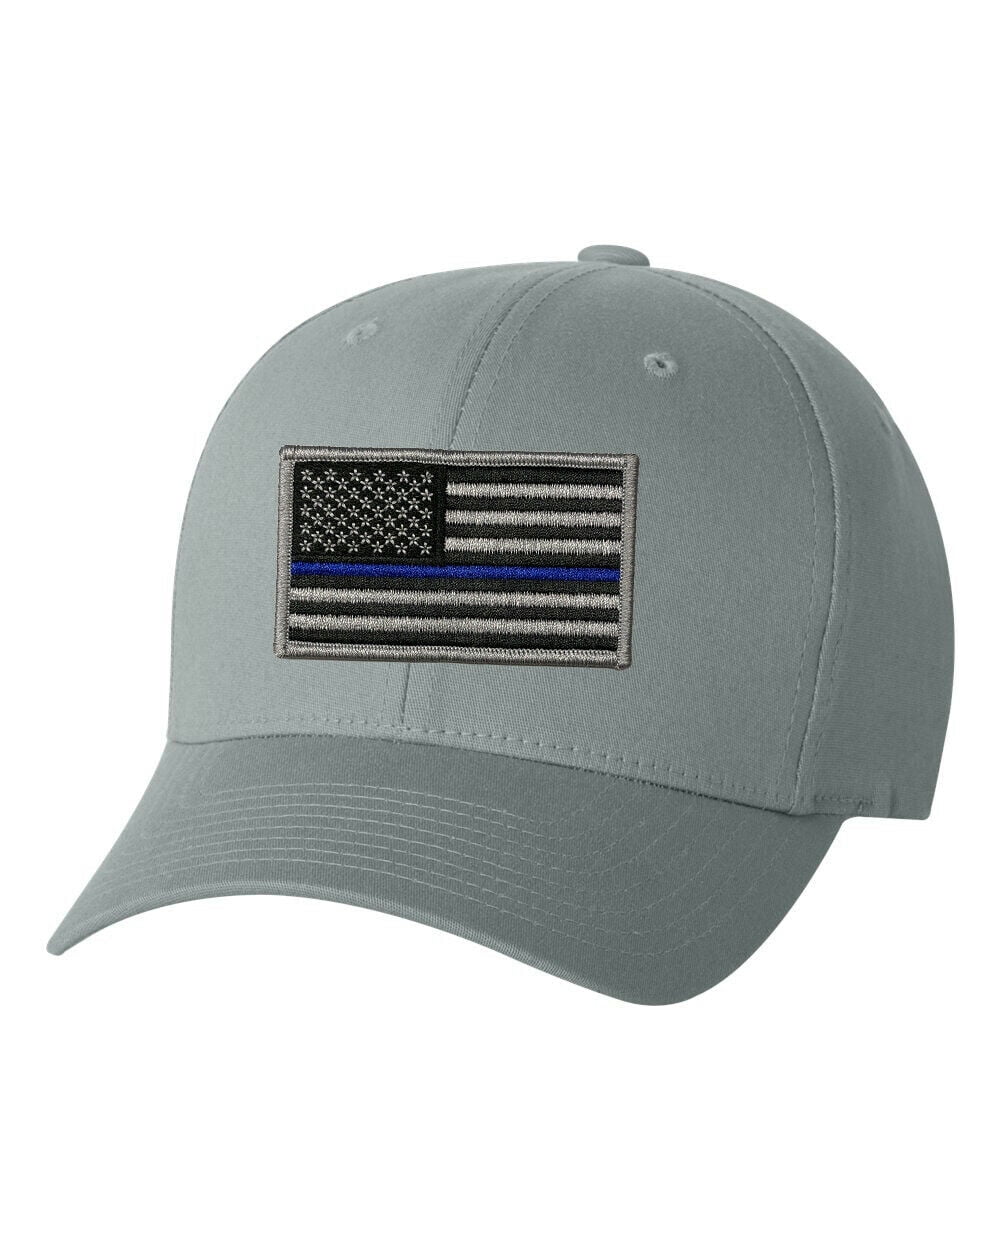 Flexfit V-Flex Twill Fitted Baseball Cap with Thin Blue Line Flag Patch Hat